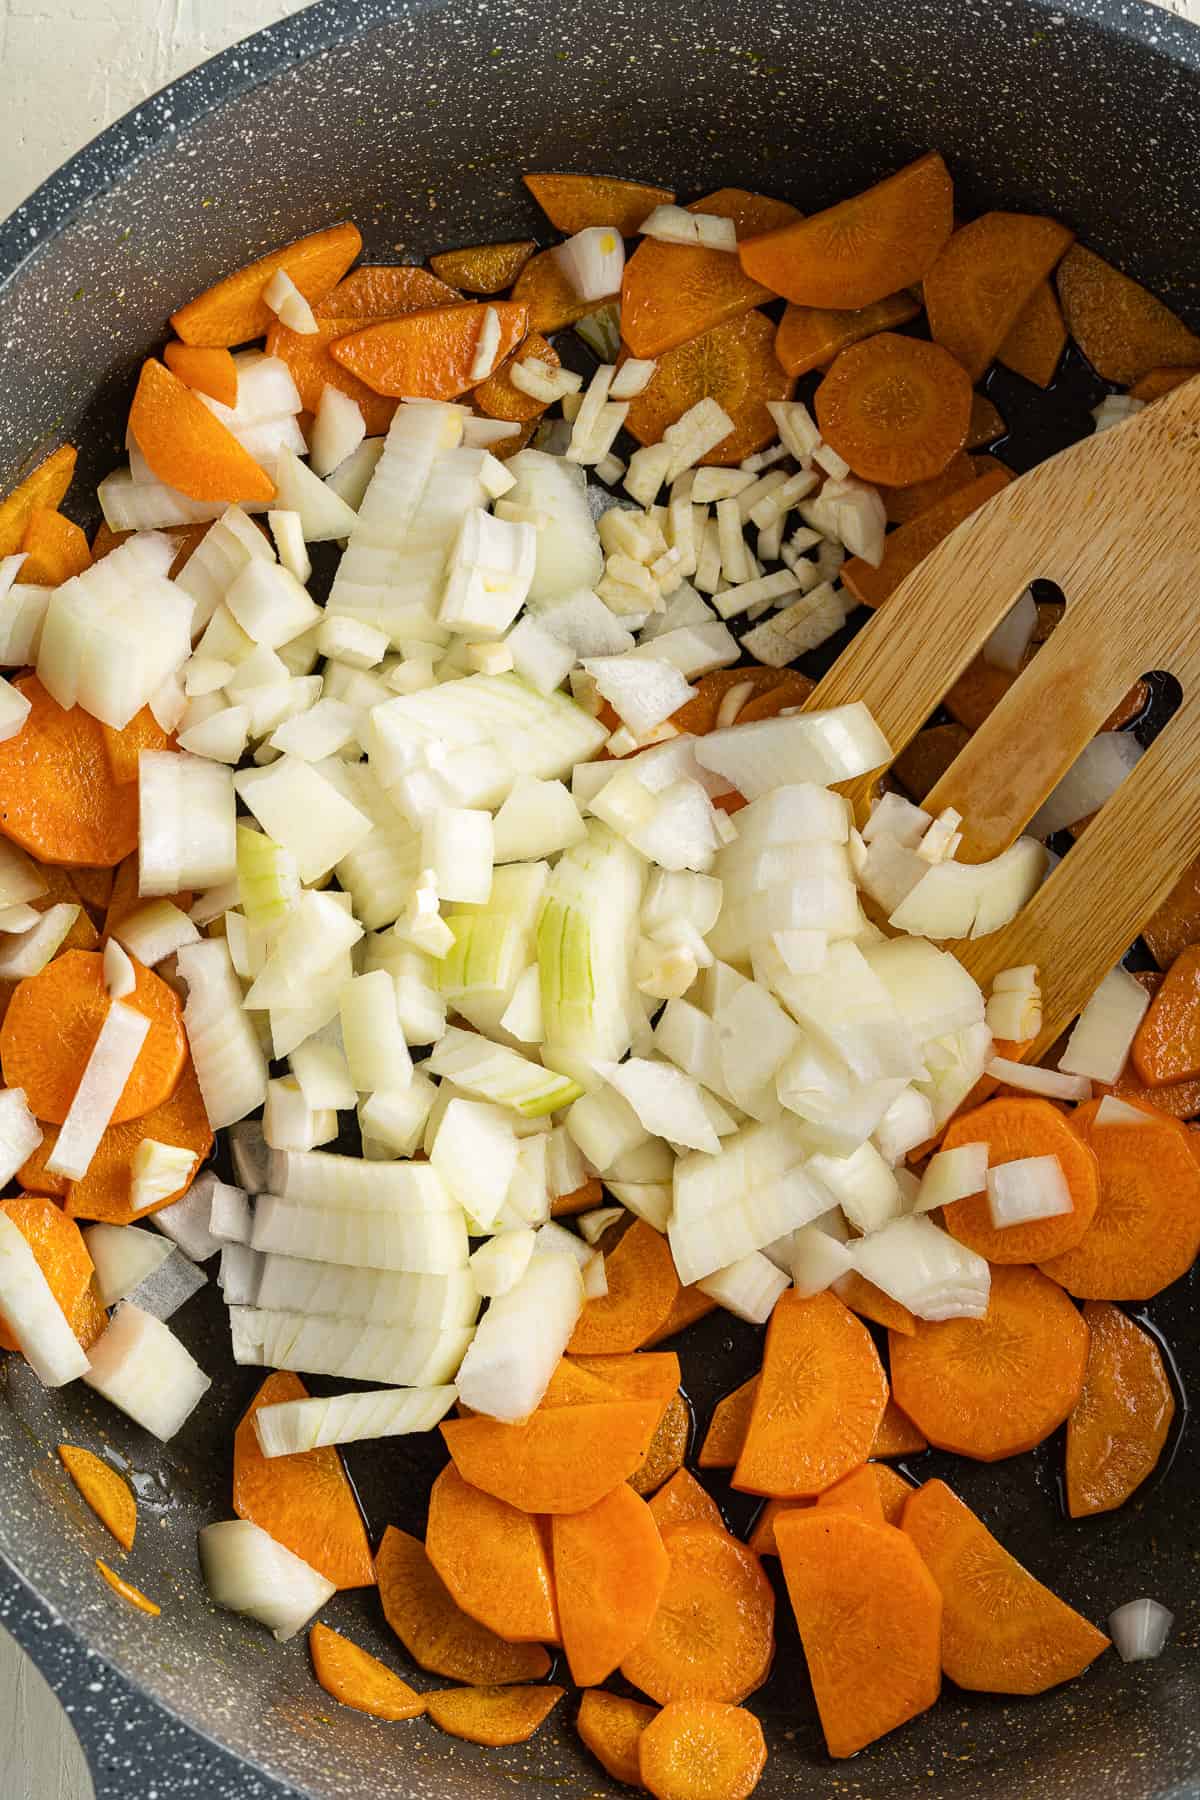 Top view of a black pot with chopped carrots, onions, and garlic in it.